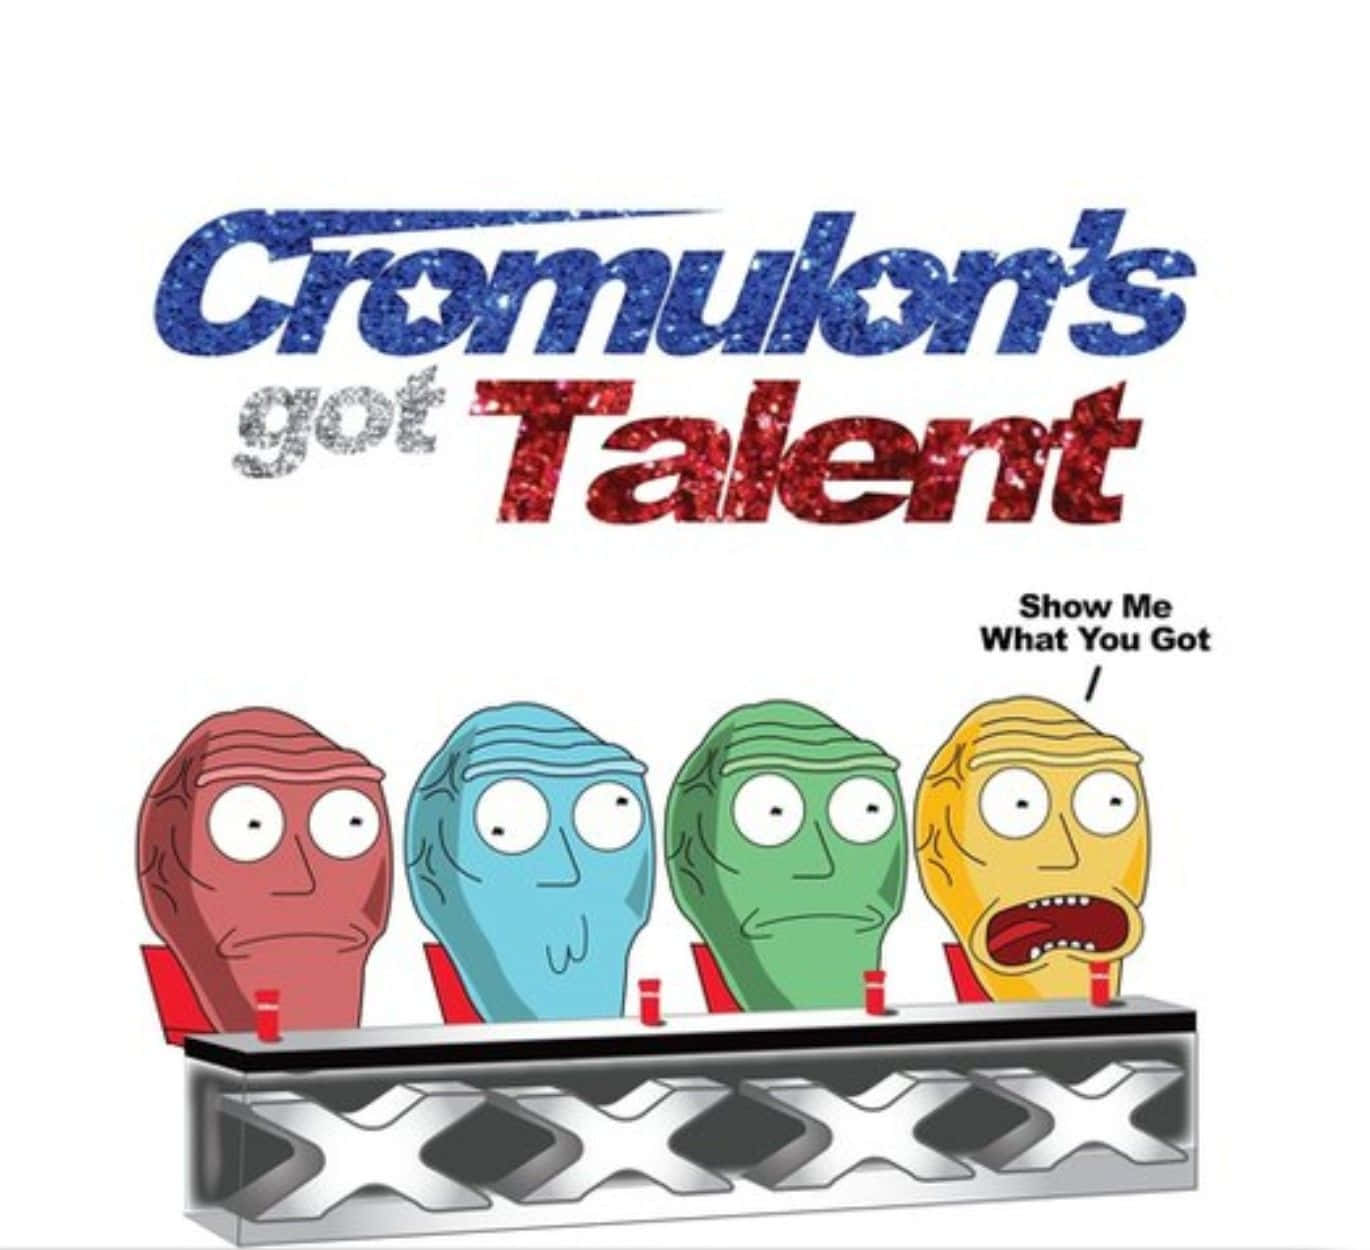 The Cromulons - Show Me What You Got Wallpaper